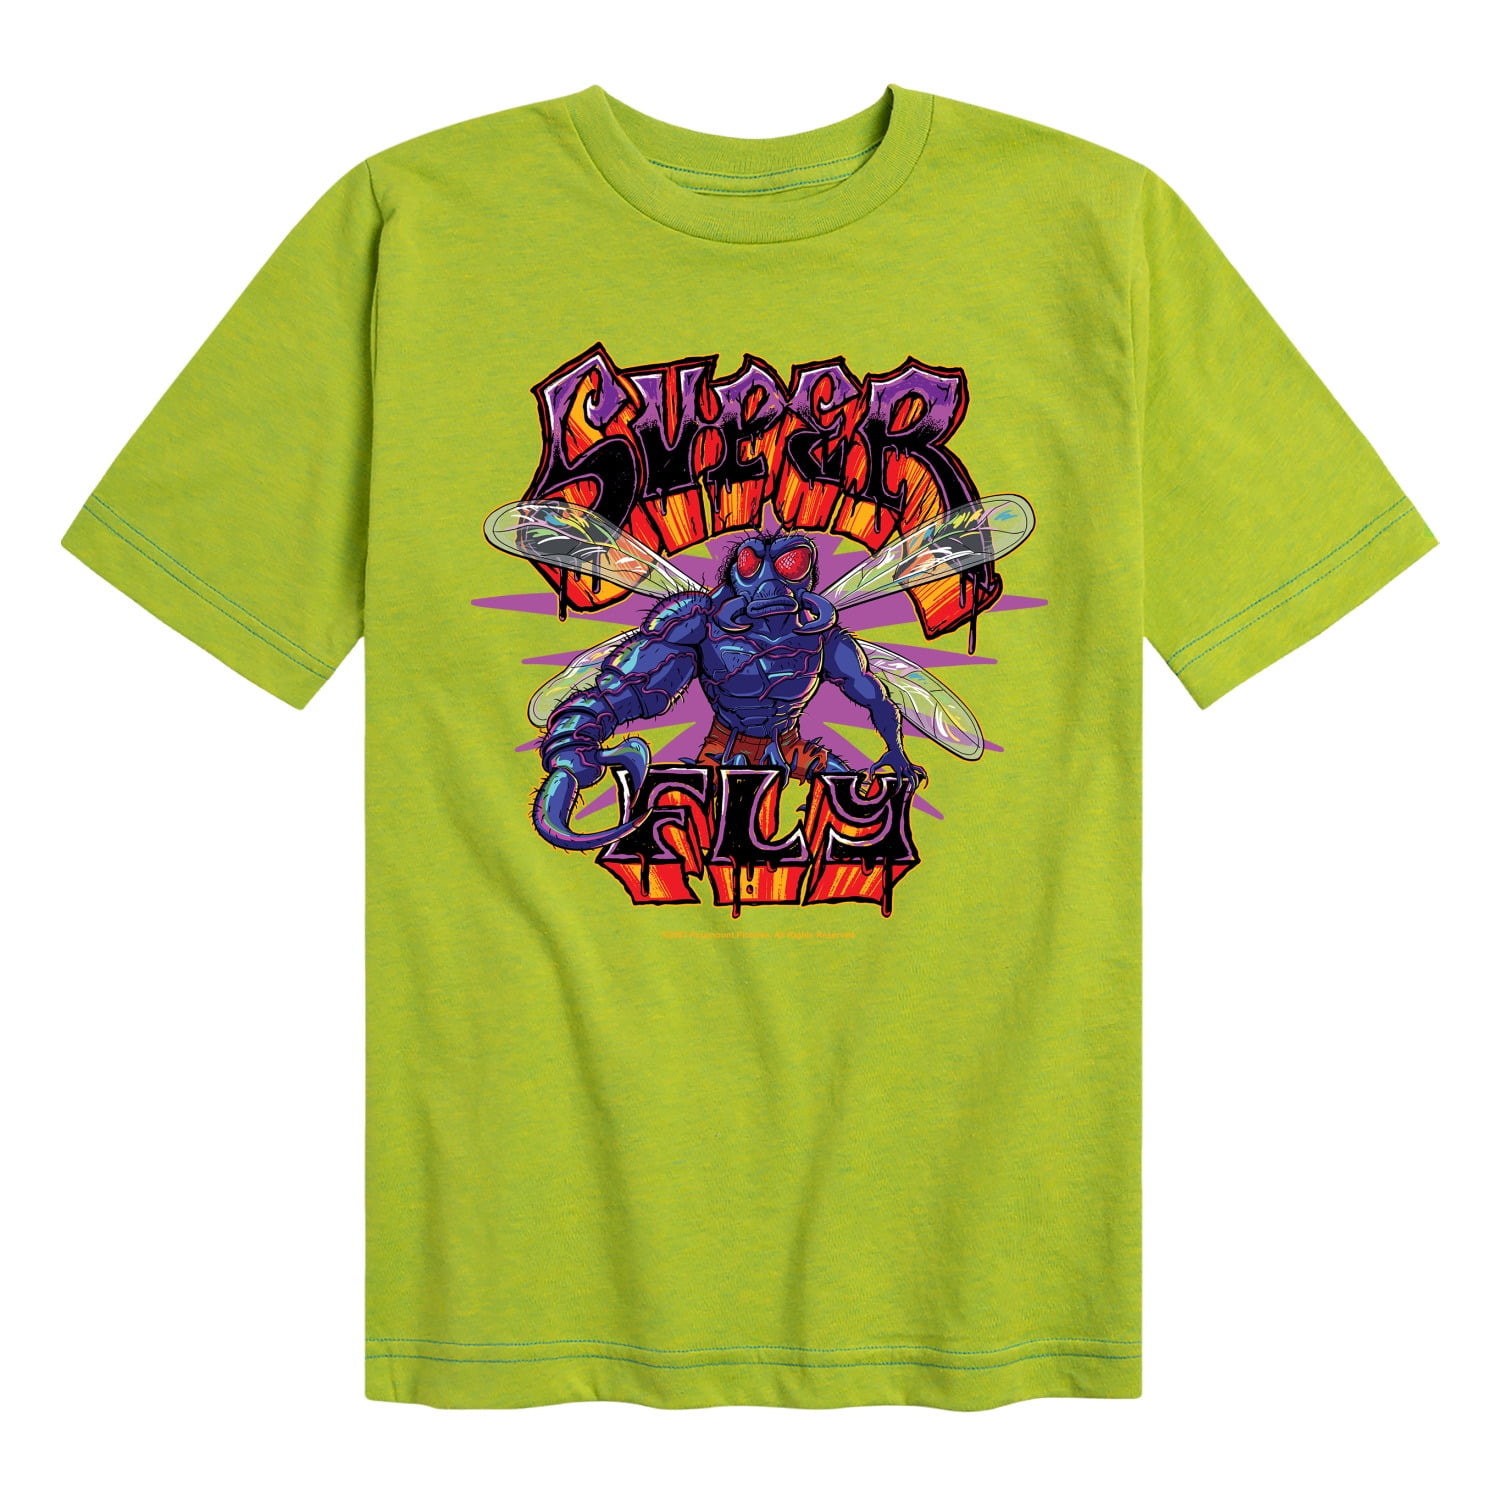 Teenage Mutant Ninja Turtles Mutant Mayhem Tee - Toddler - Navy - Size Xl/5t | in Stock and Ready to Ship | Holiday Gift